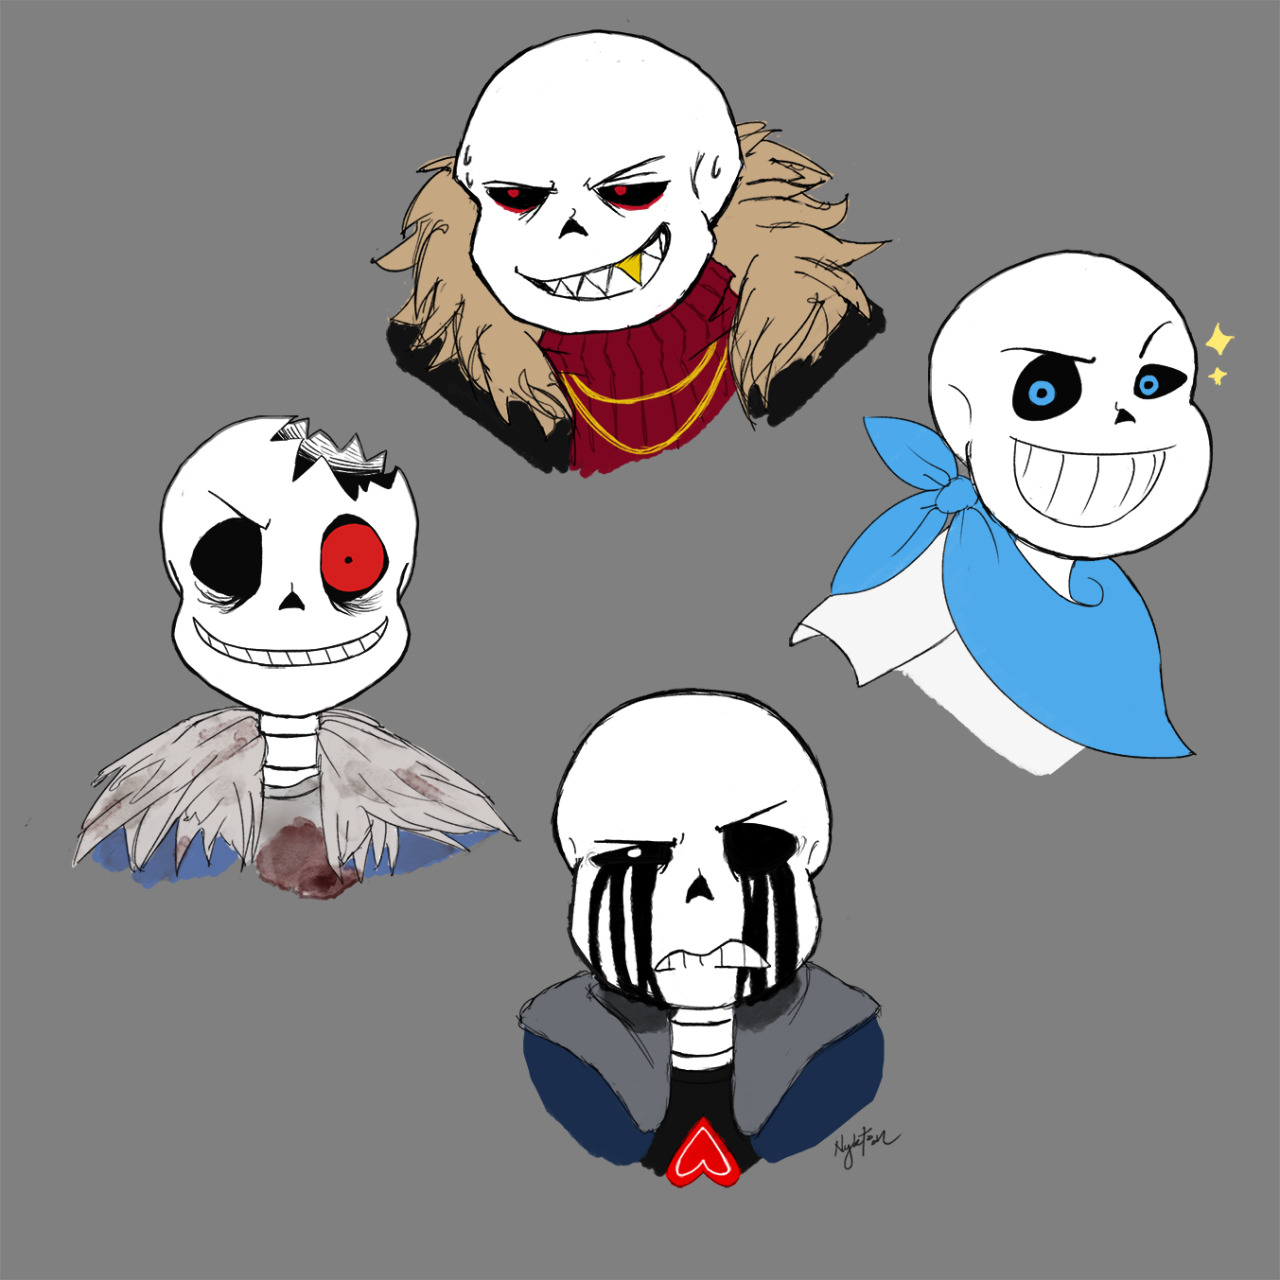 Wanted to try my hand at drawing some AU boys as inspired by their canon :3c (rather than specifically BHC versions). Obviously still took some creative liberties. I’m really happy with how they came out! #nyktooned #uf!sans  #us!sans  #killer!sans  #horror!sans #tw blood